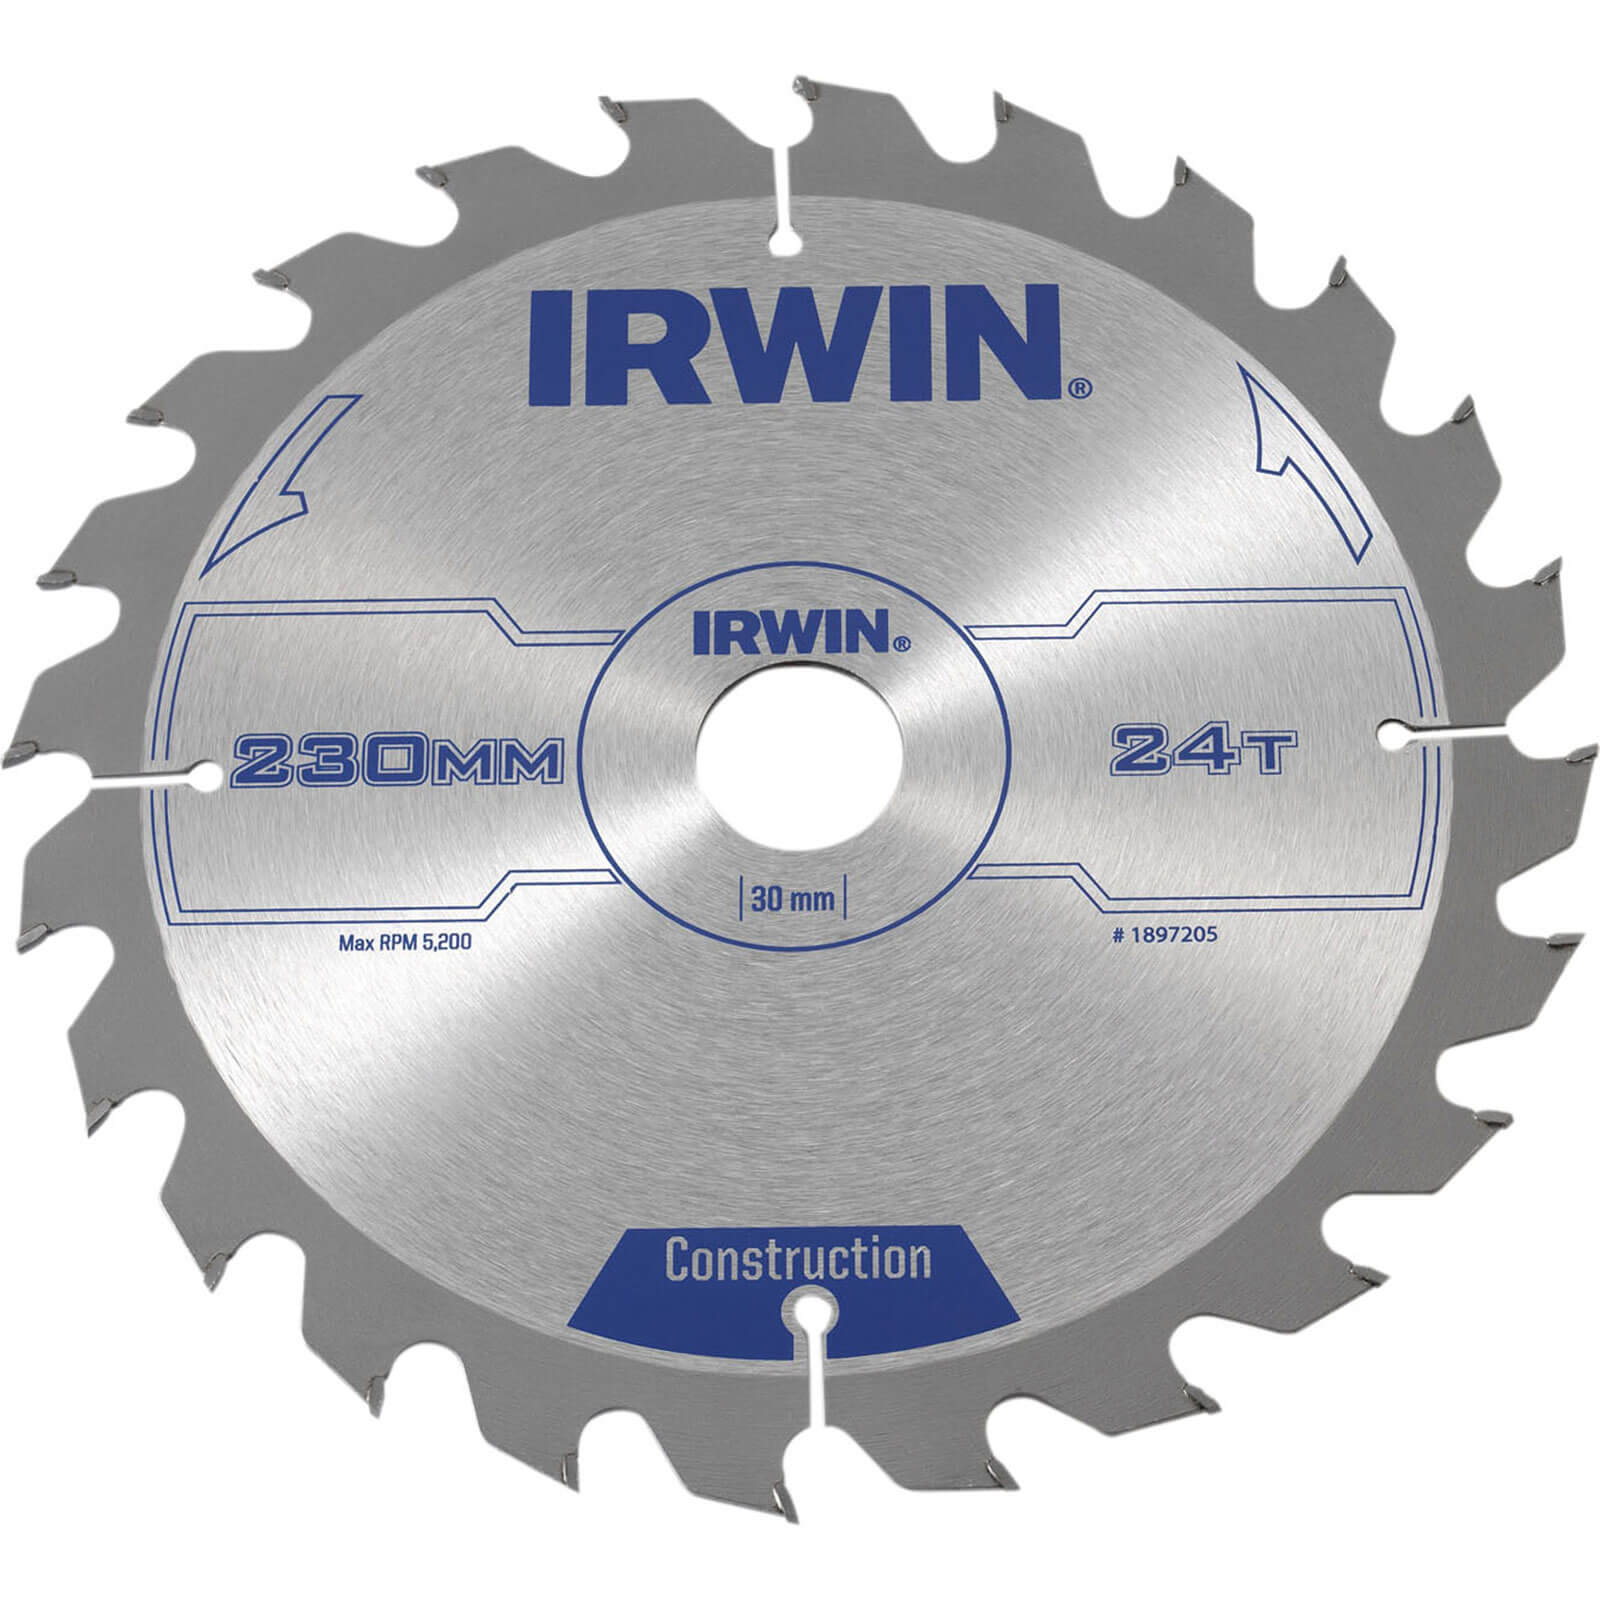 Photo of Irwin Atb Construction Circular Saw Blade 230mm 24t 30mm